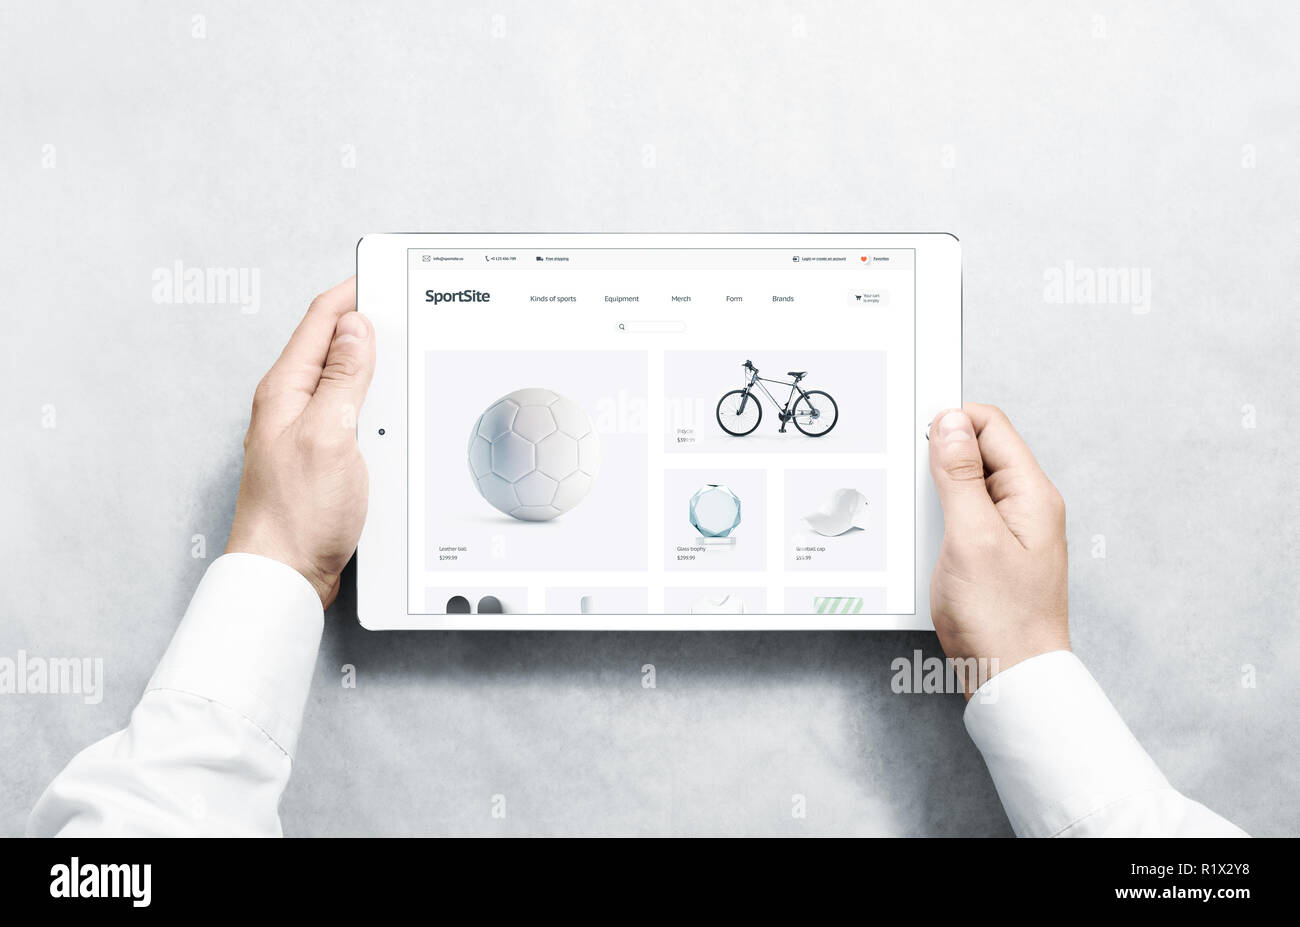 Hands holding tablet with sport webstore mock up on screen, isolated. Training web page interface mockup. Internet website template. Web store screen layout for computer display. Stock Photo